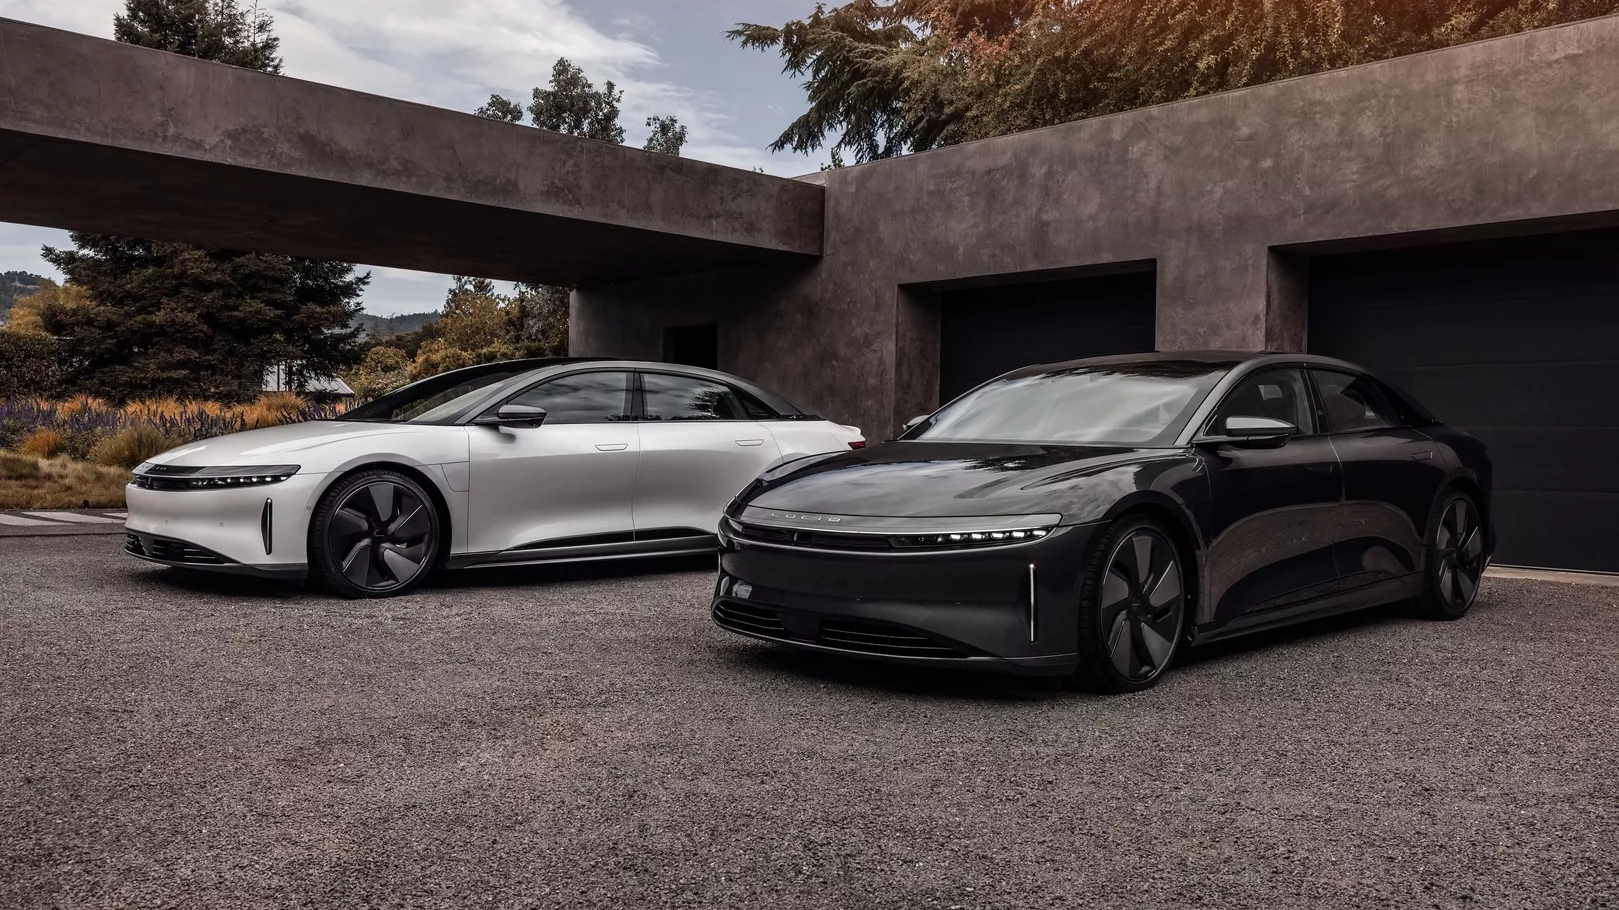 Lucid Air Stealth Prototype In Lucid Motors Production Lot